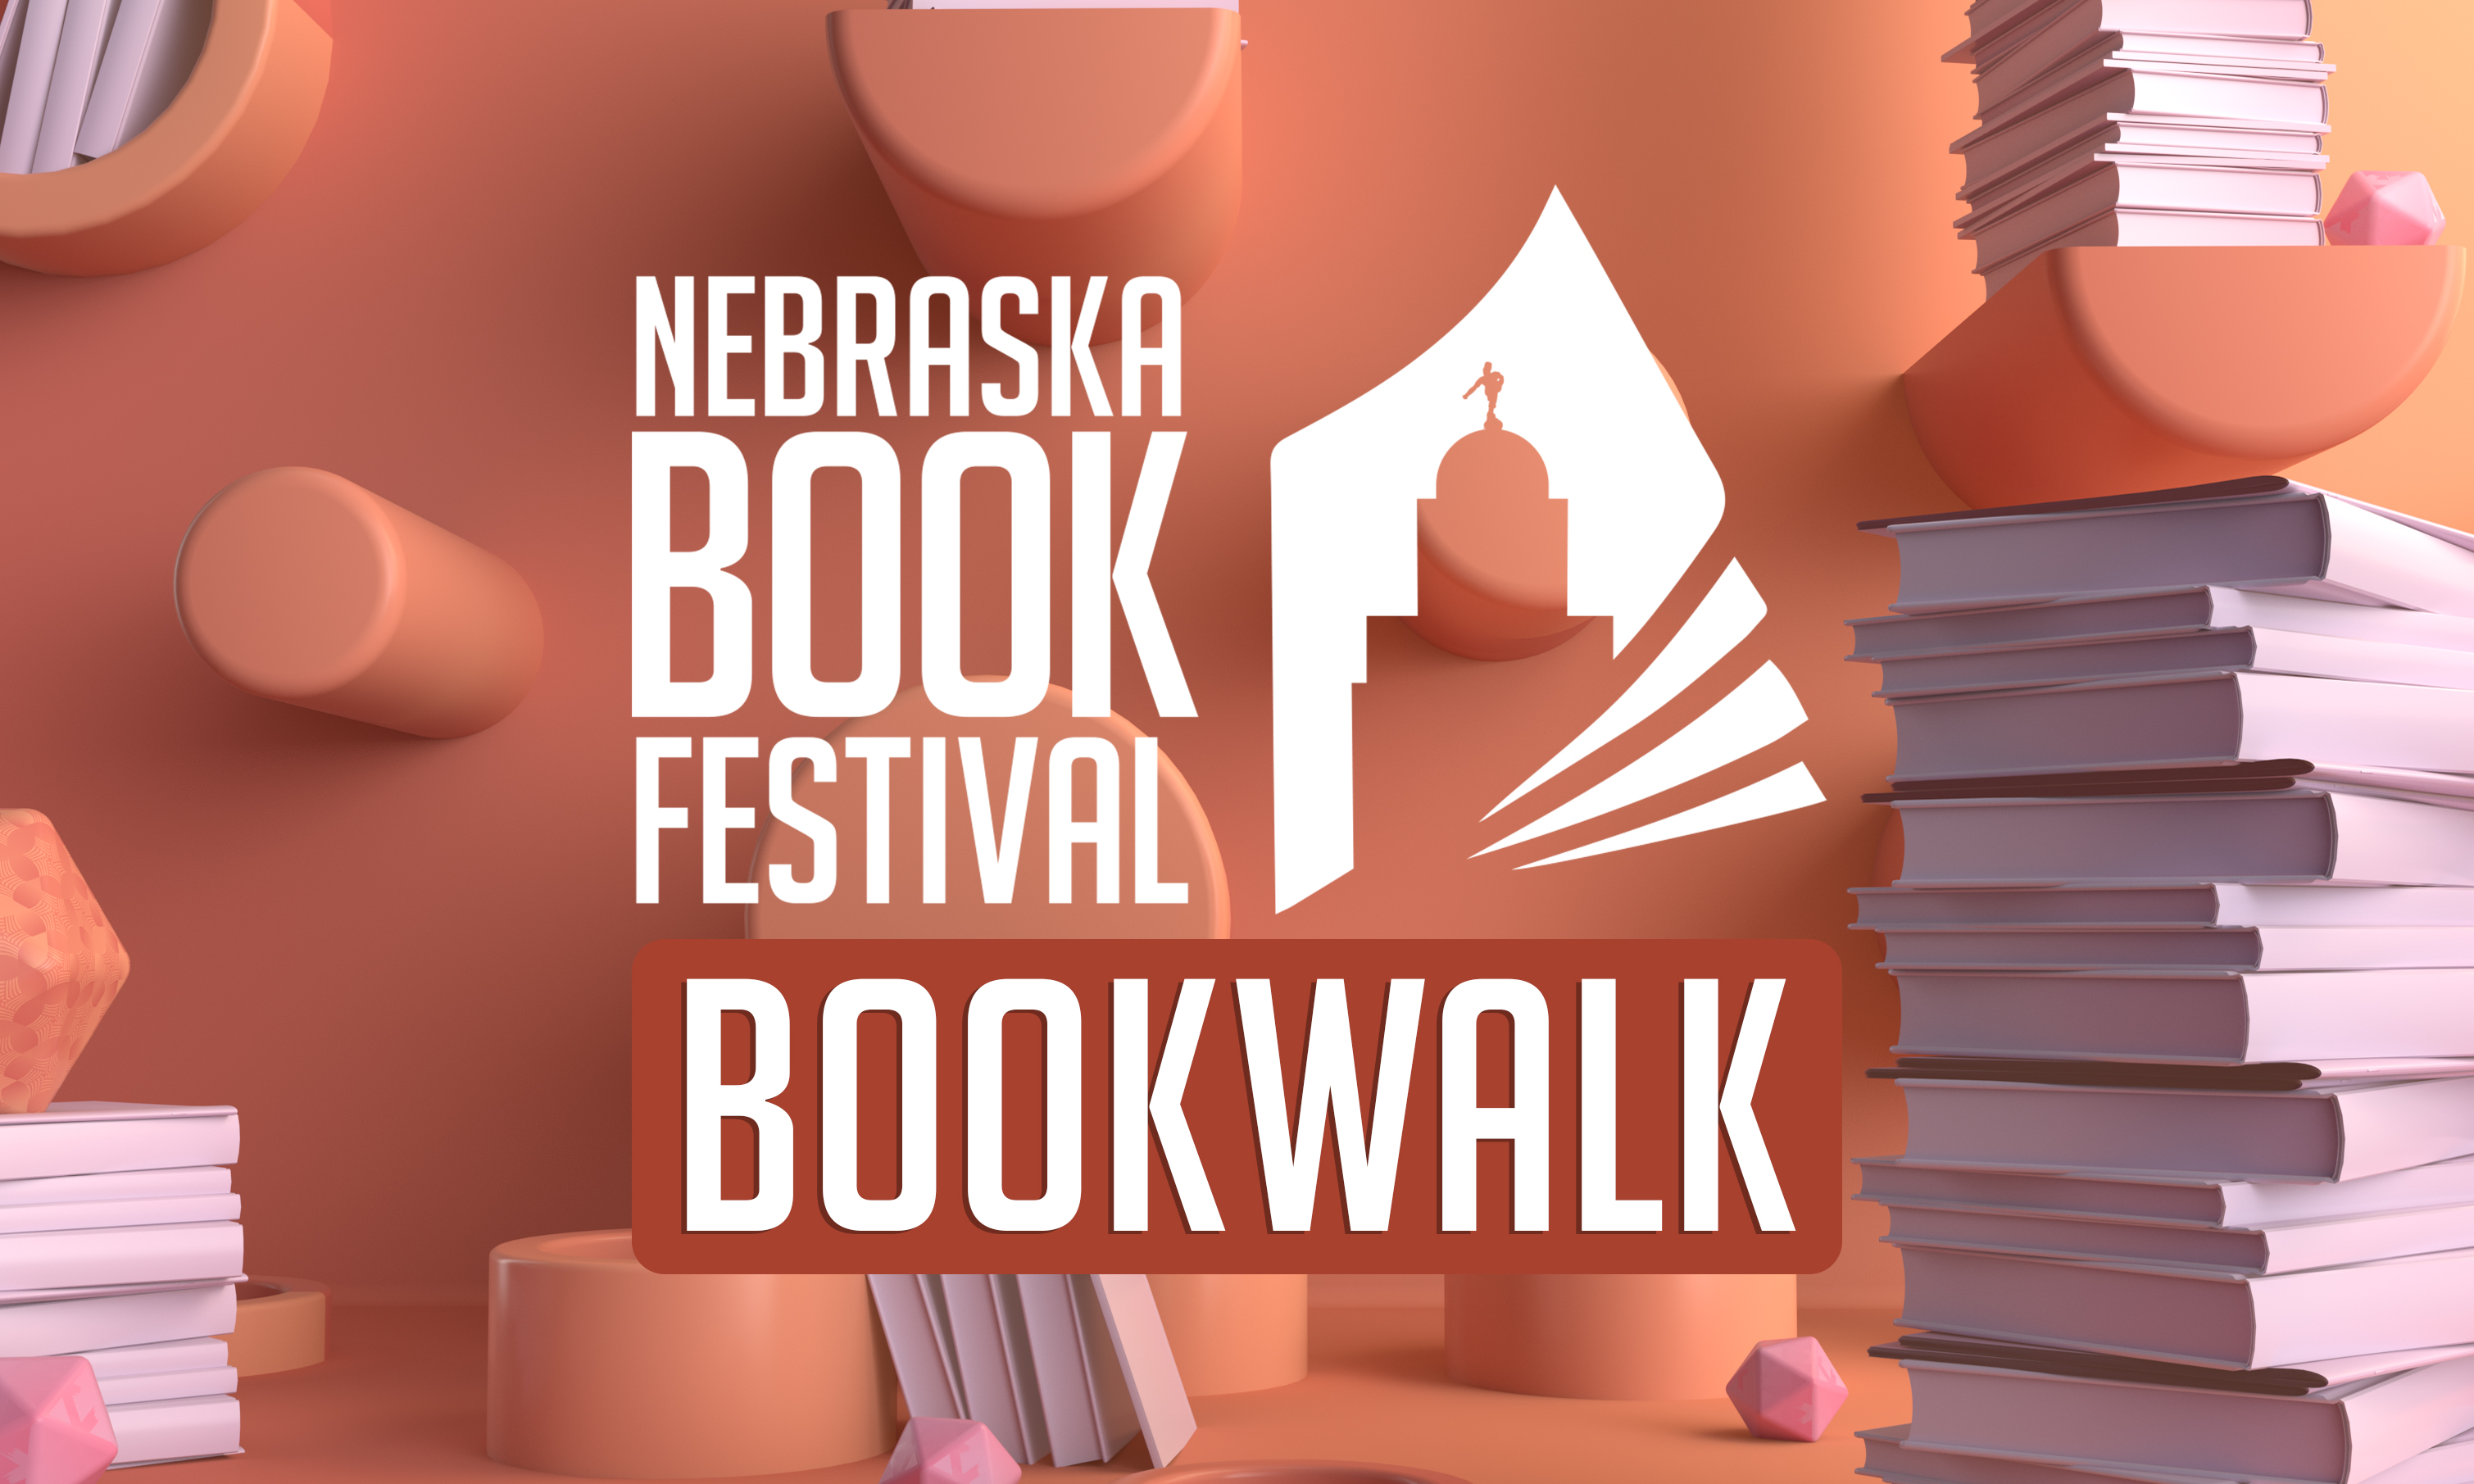 Support local bookstores in August with the 2019 Bookwalk, a Nebraska